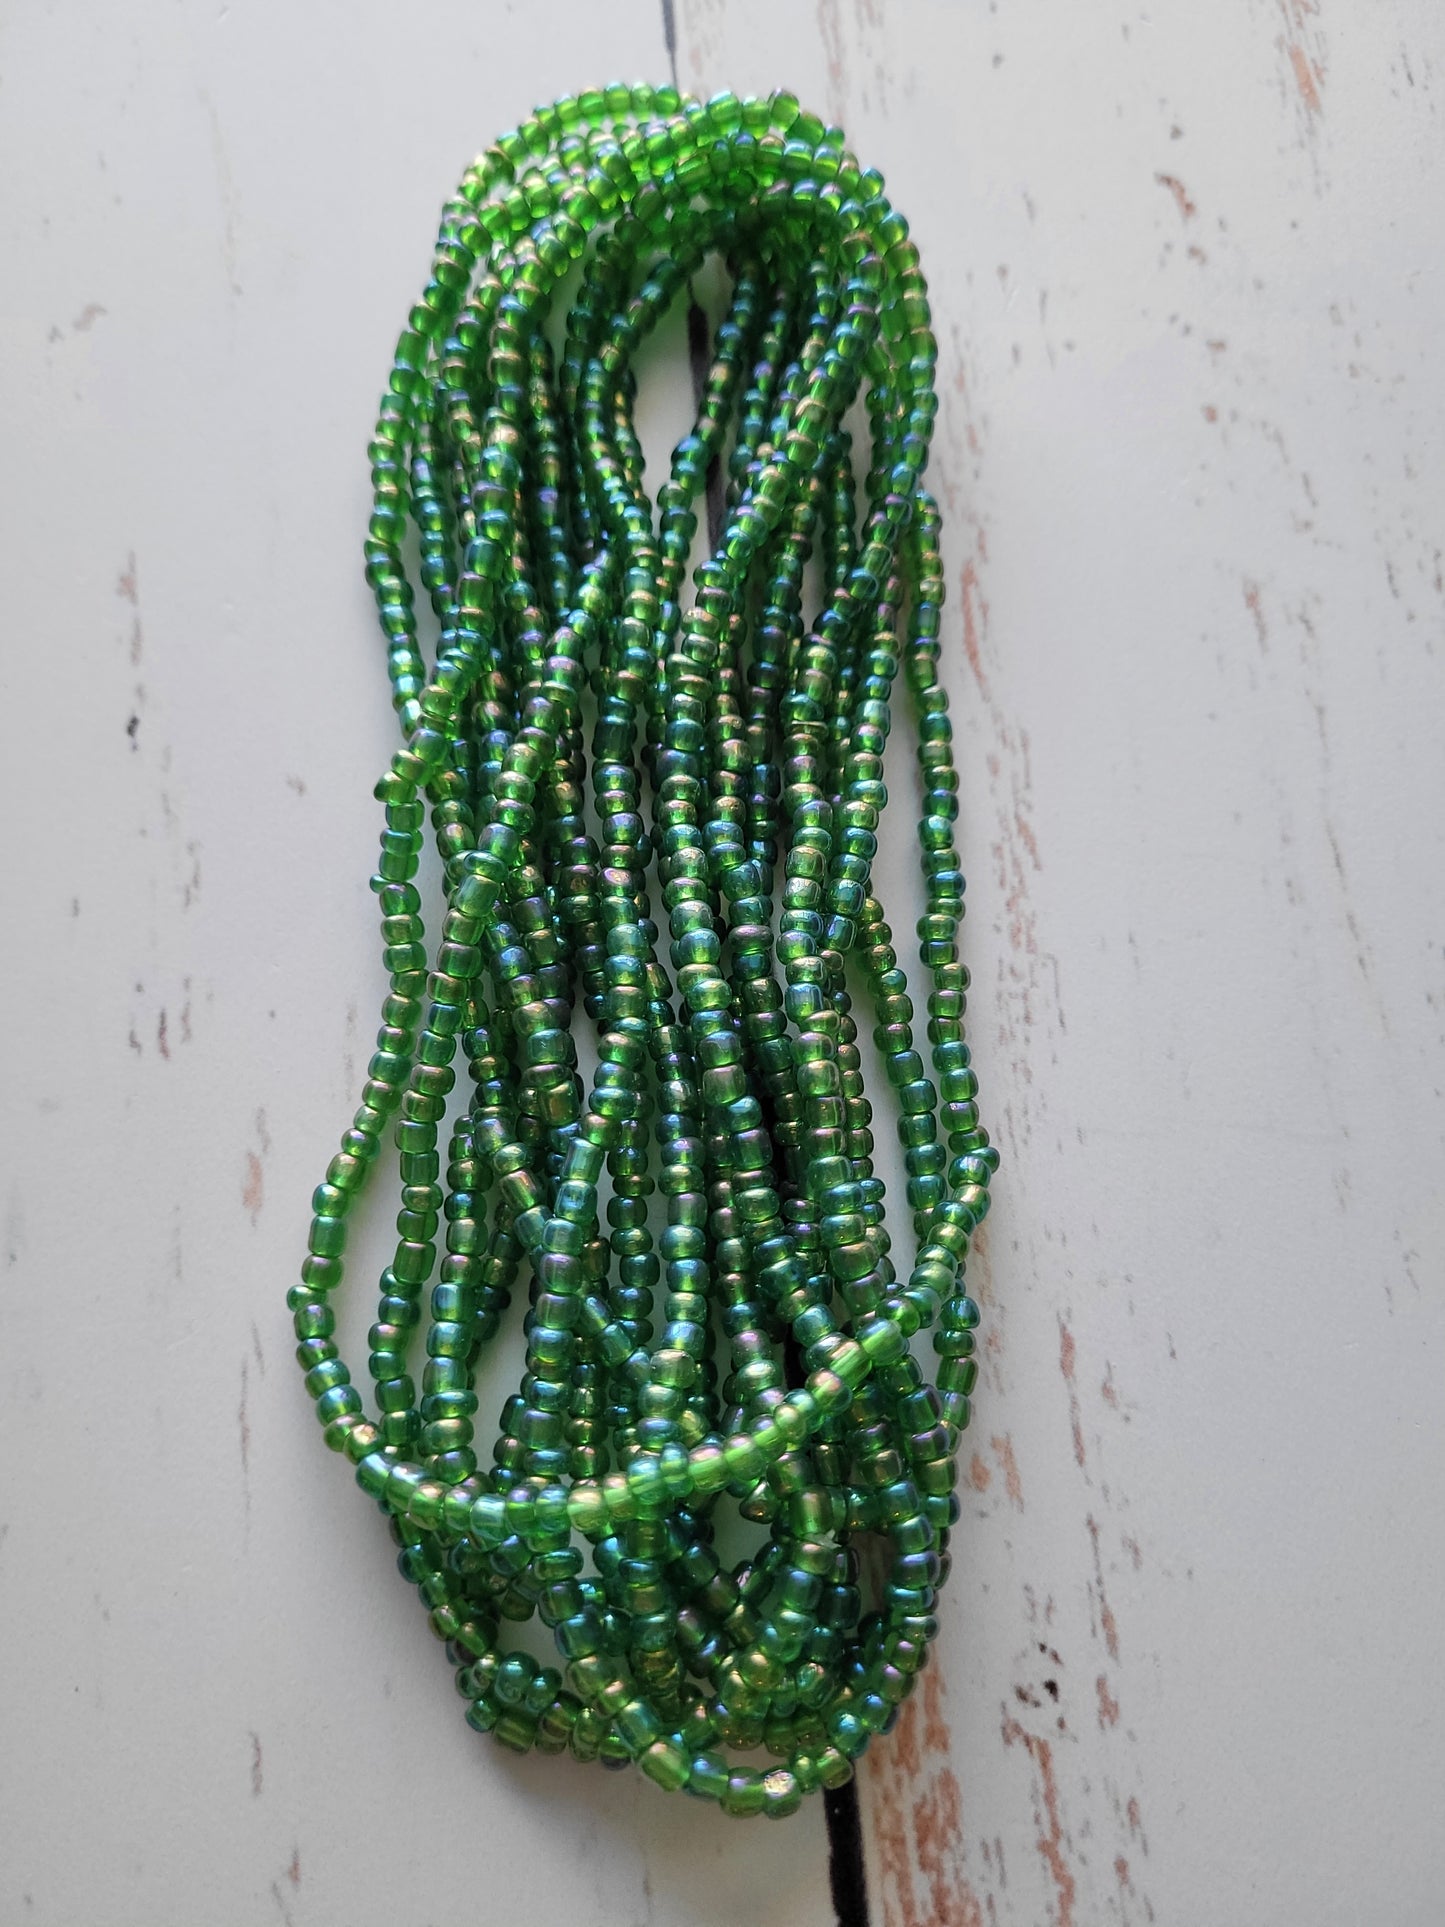 Green Seed Beed Necklace